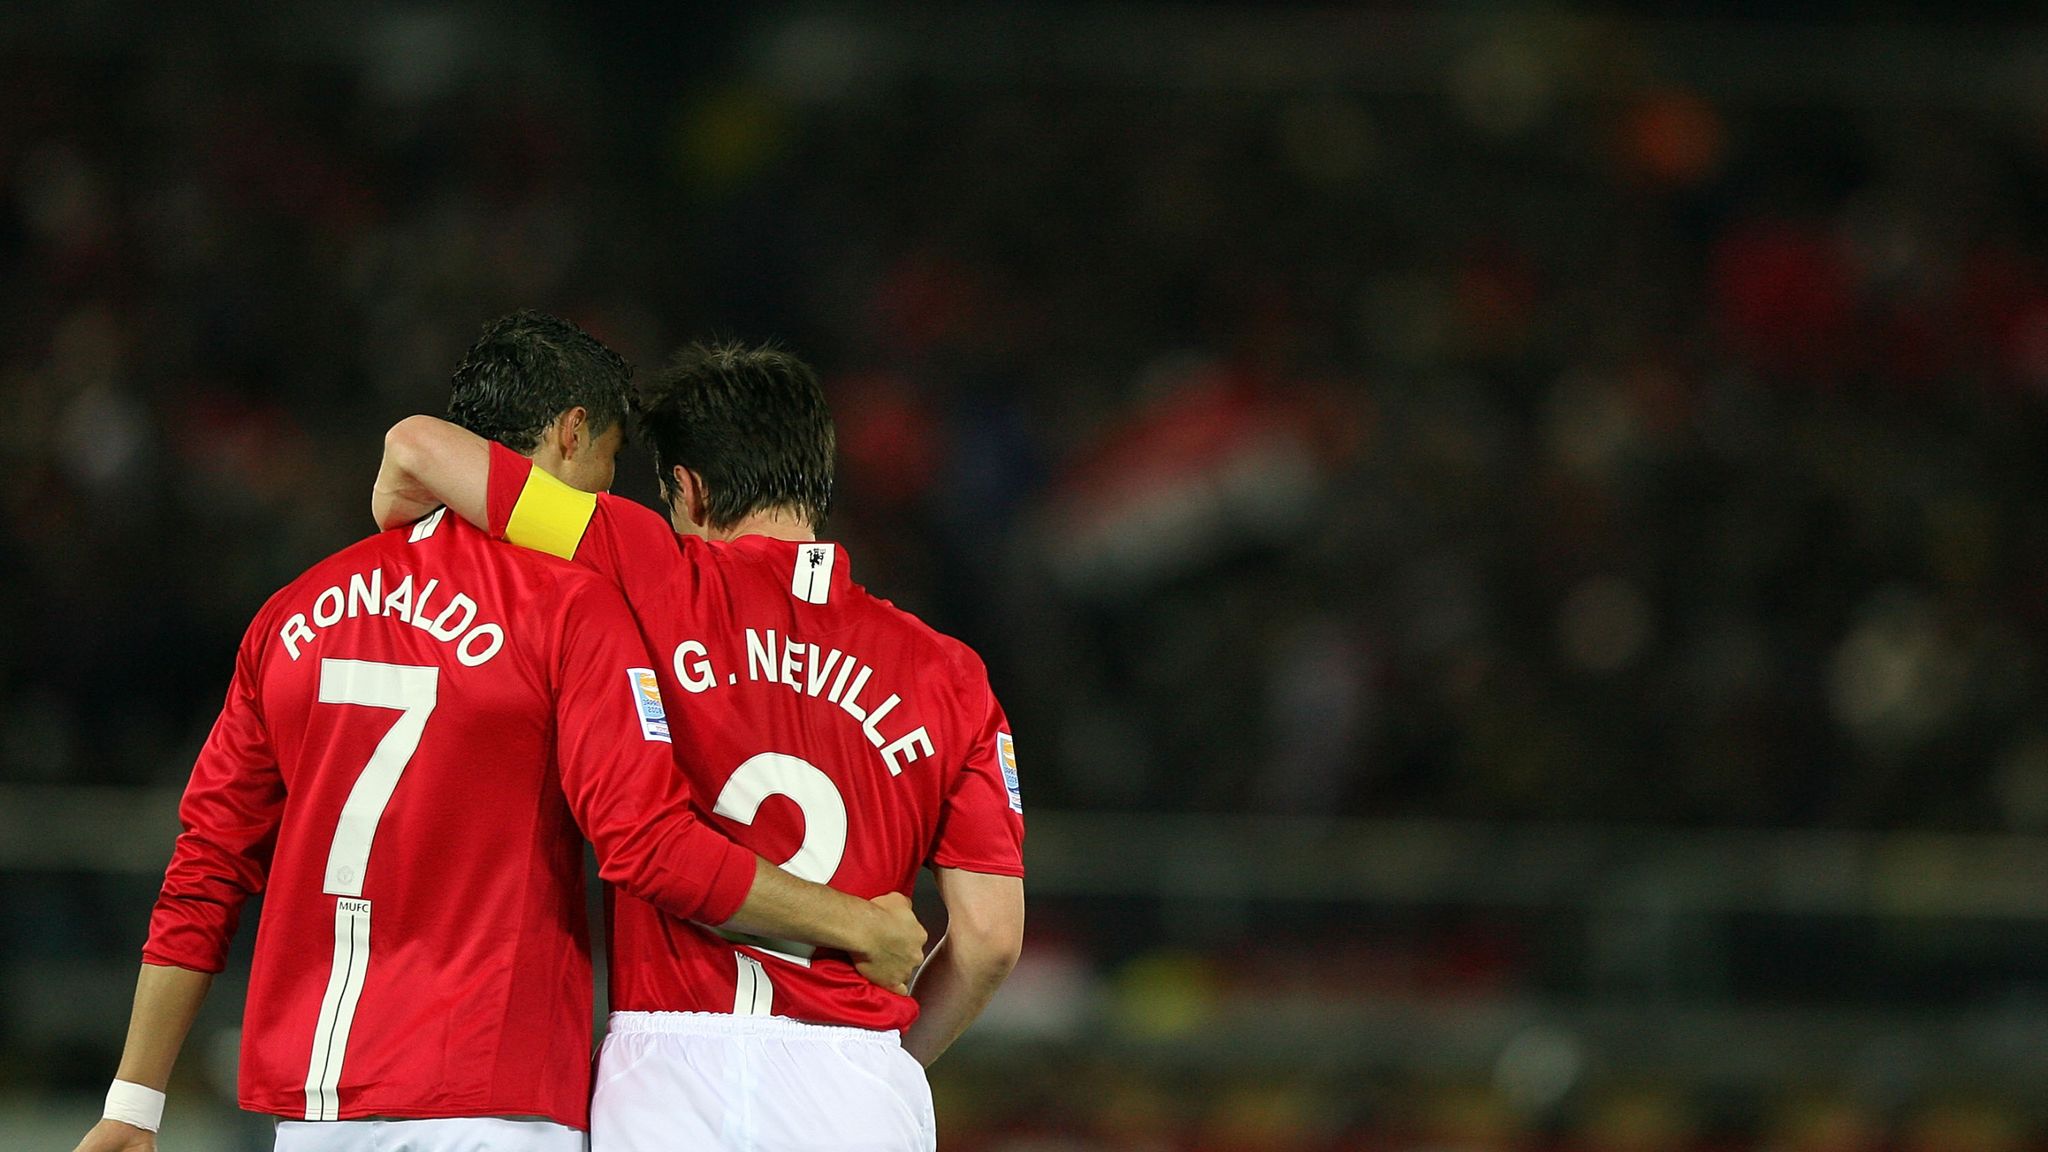 Gary Neville Reflects on Training Ground Battles with Cristiano Ronaldo at Manchester United